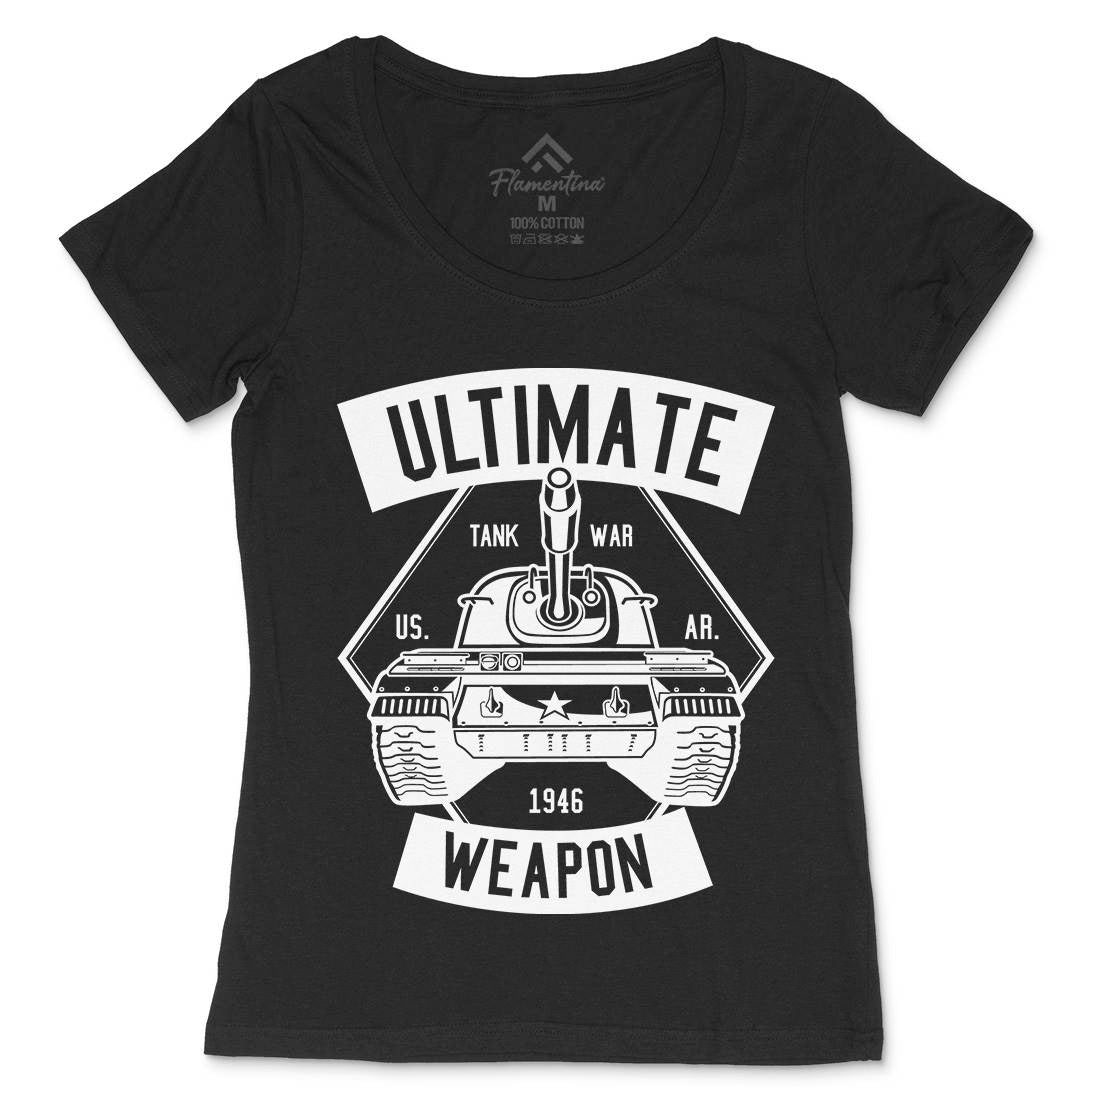 Tank War Ultimate Weapon Womens Scoop Neck T-Shirt Army B649